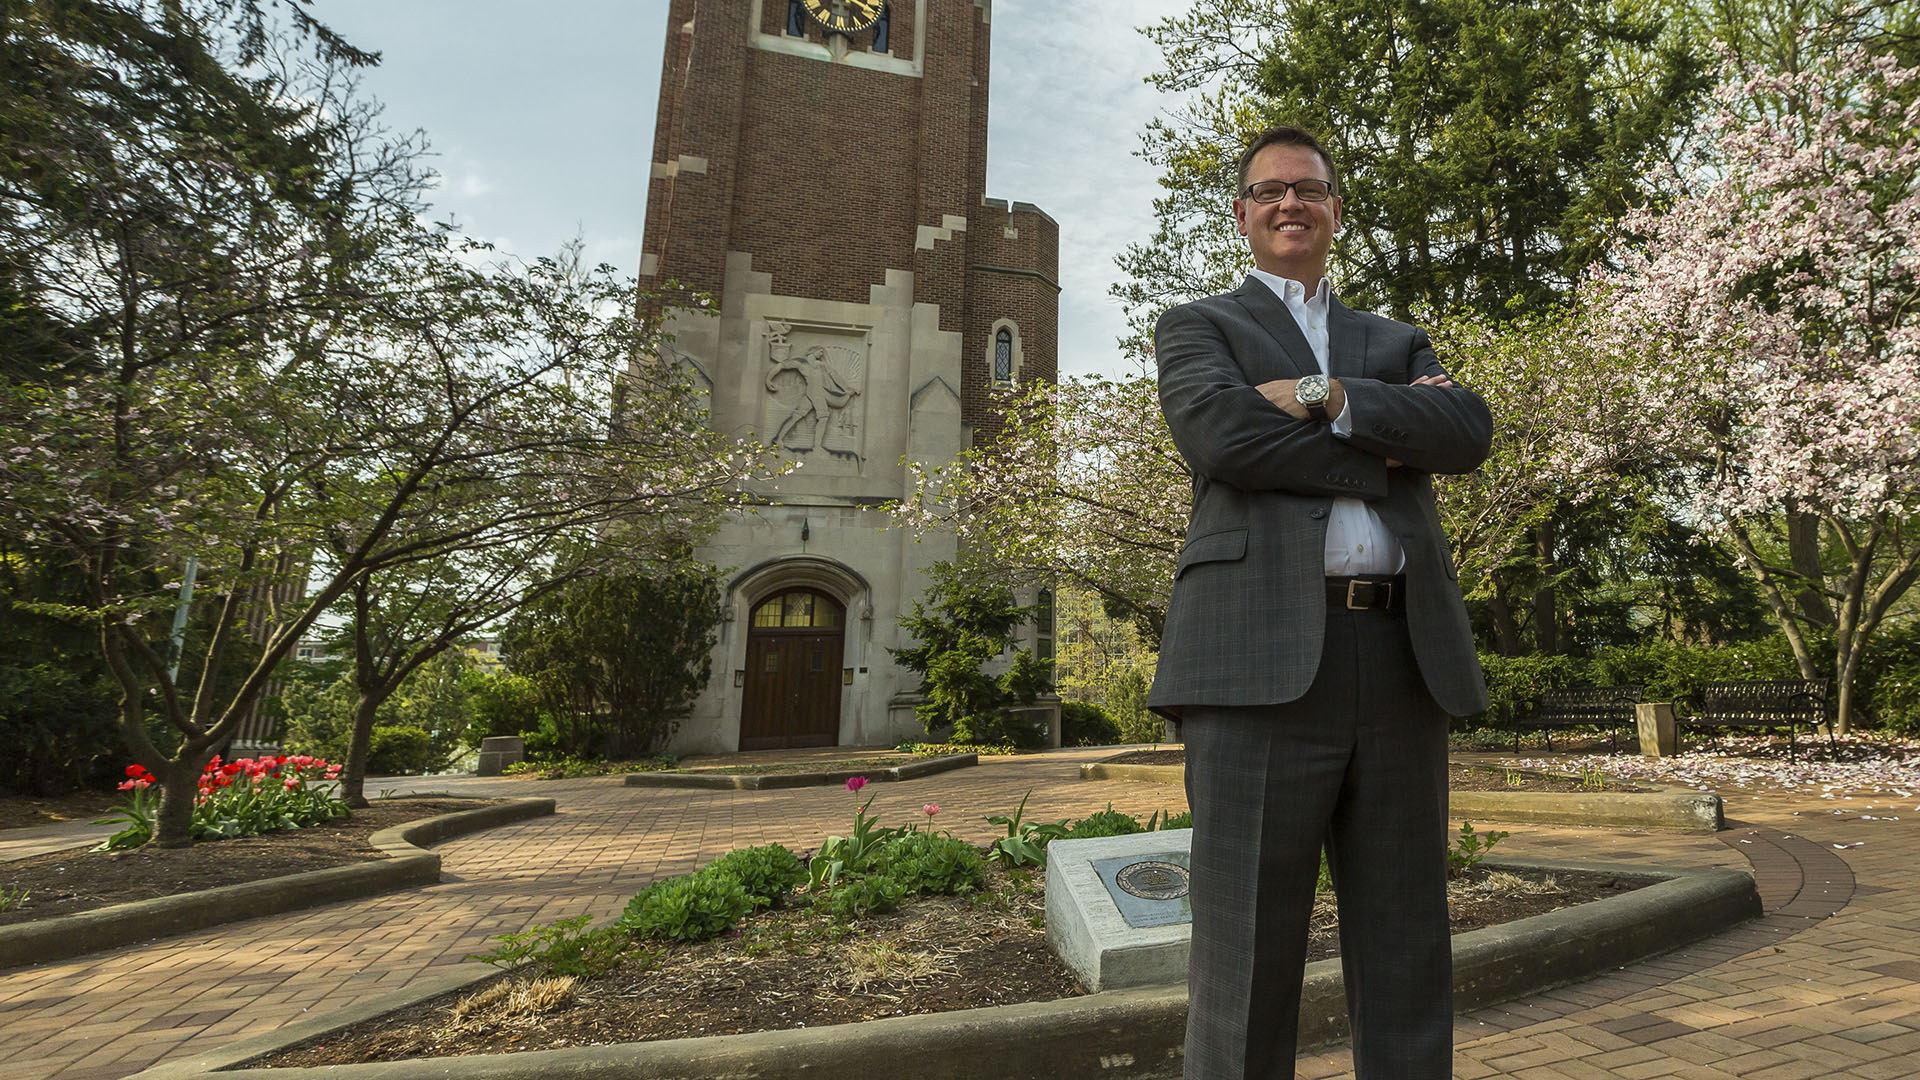 Jeff Day, MS in Management, Strategy and Leadership grad, standing in a business suit on MSU's campus.